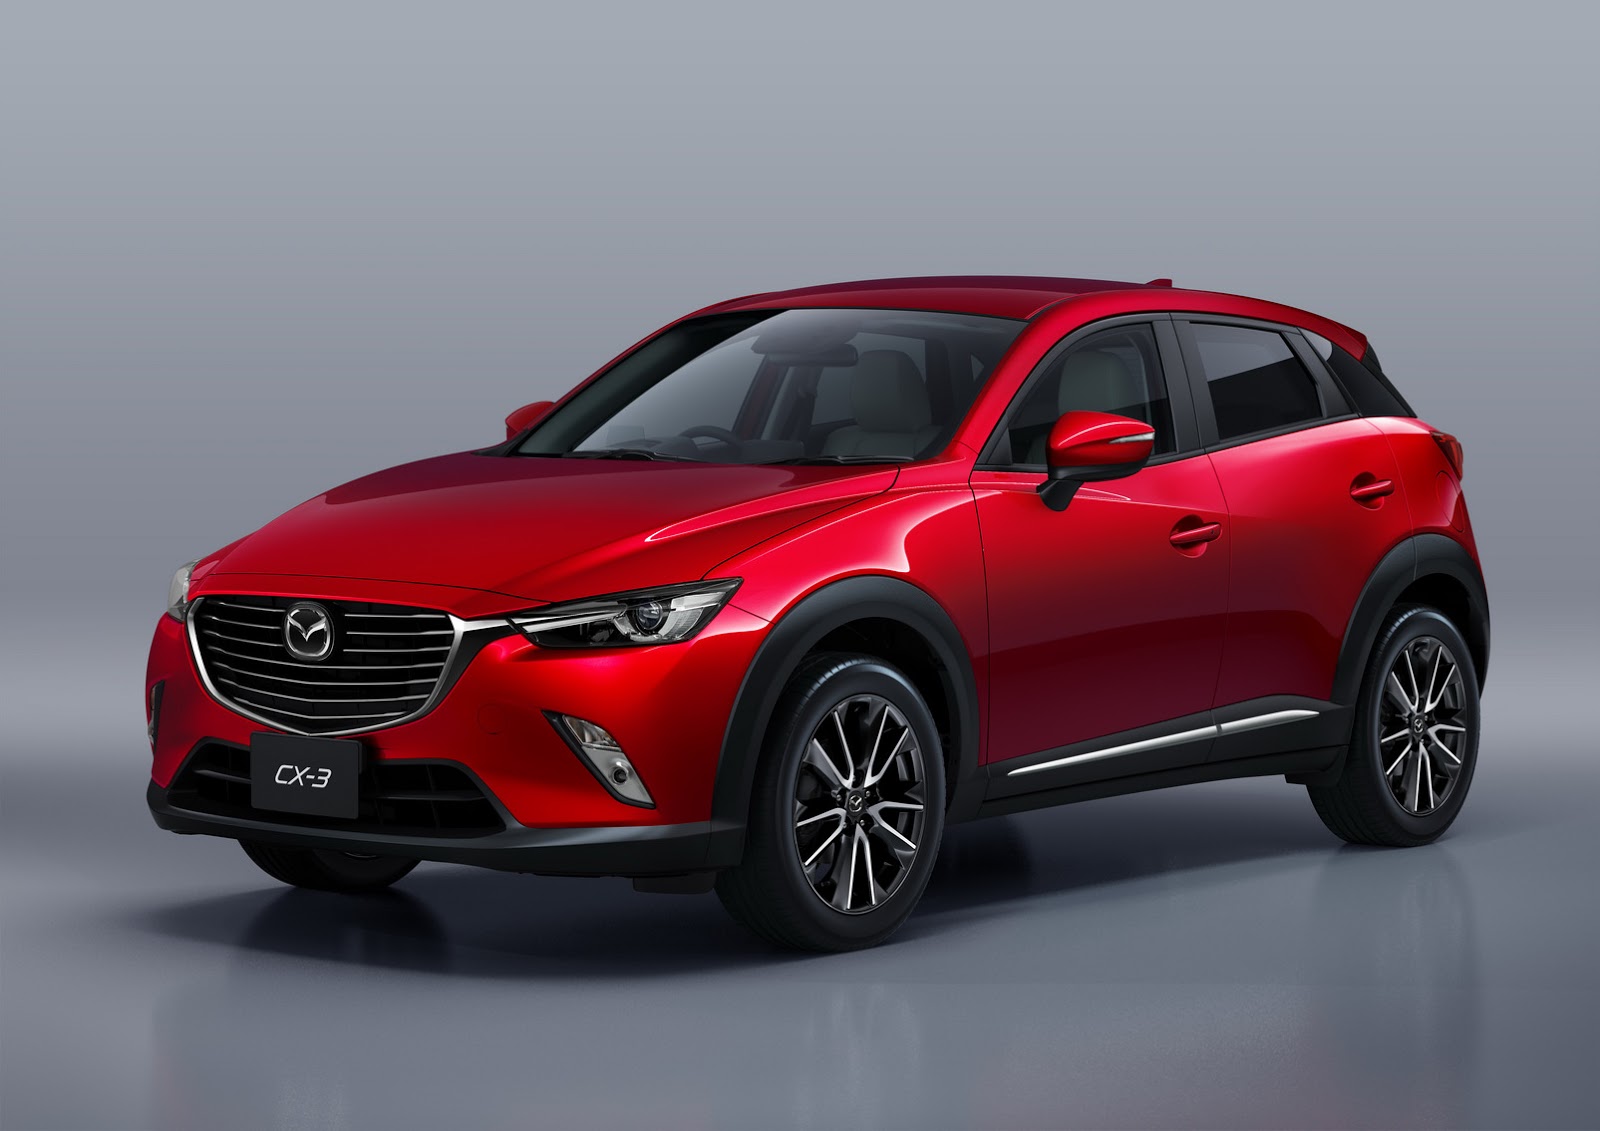 2016 Mazda CX3 Crossover Looks Great from Every Angle